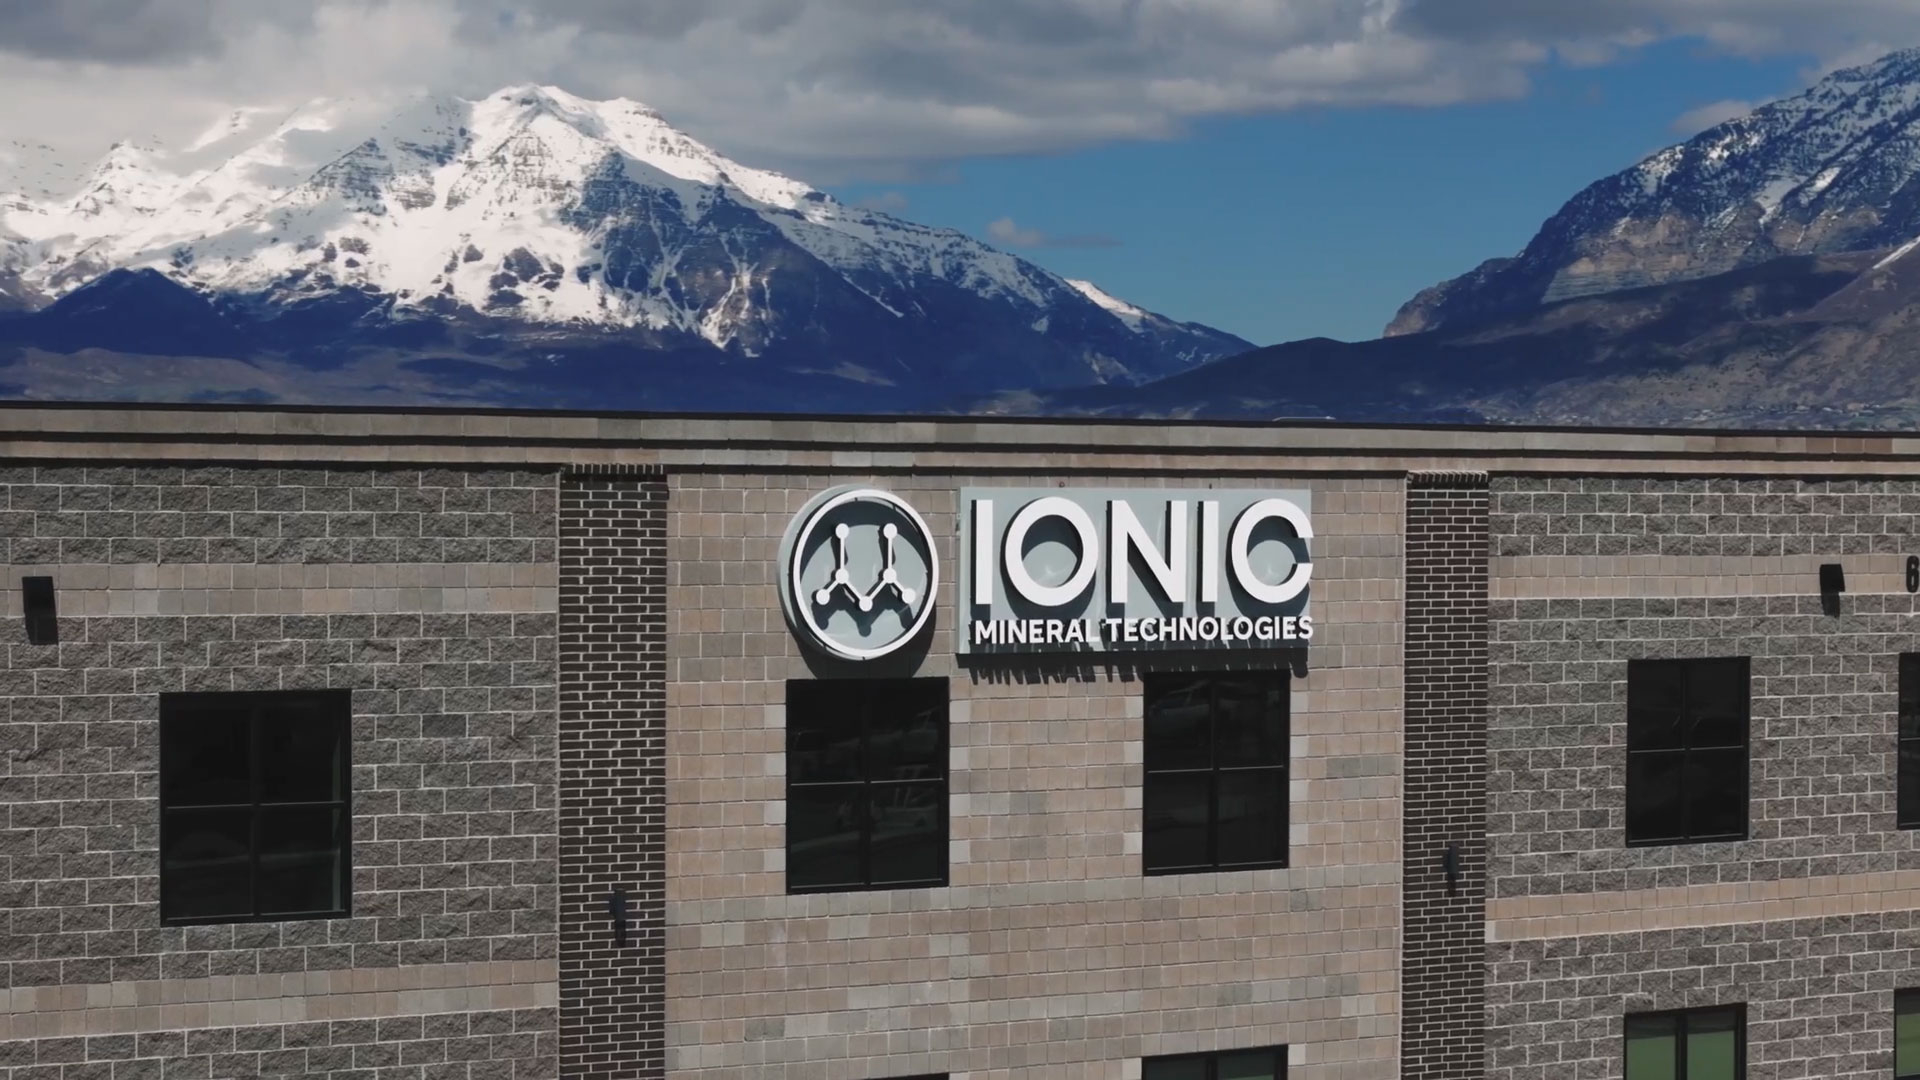 Ionic Mineral Technologies Announces Significant Production Facility Expansion in Provo, Utah